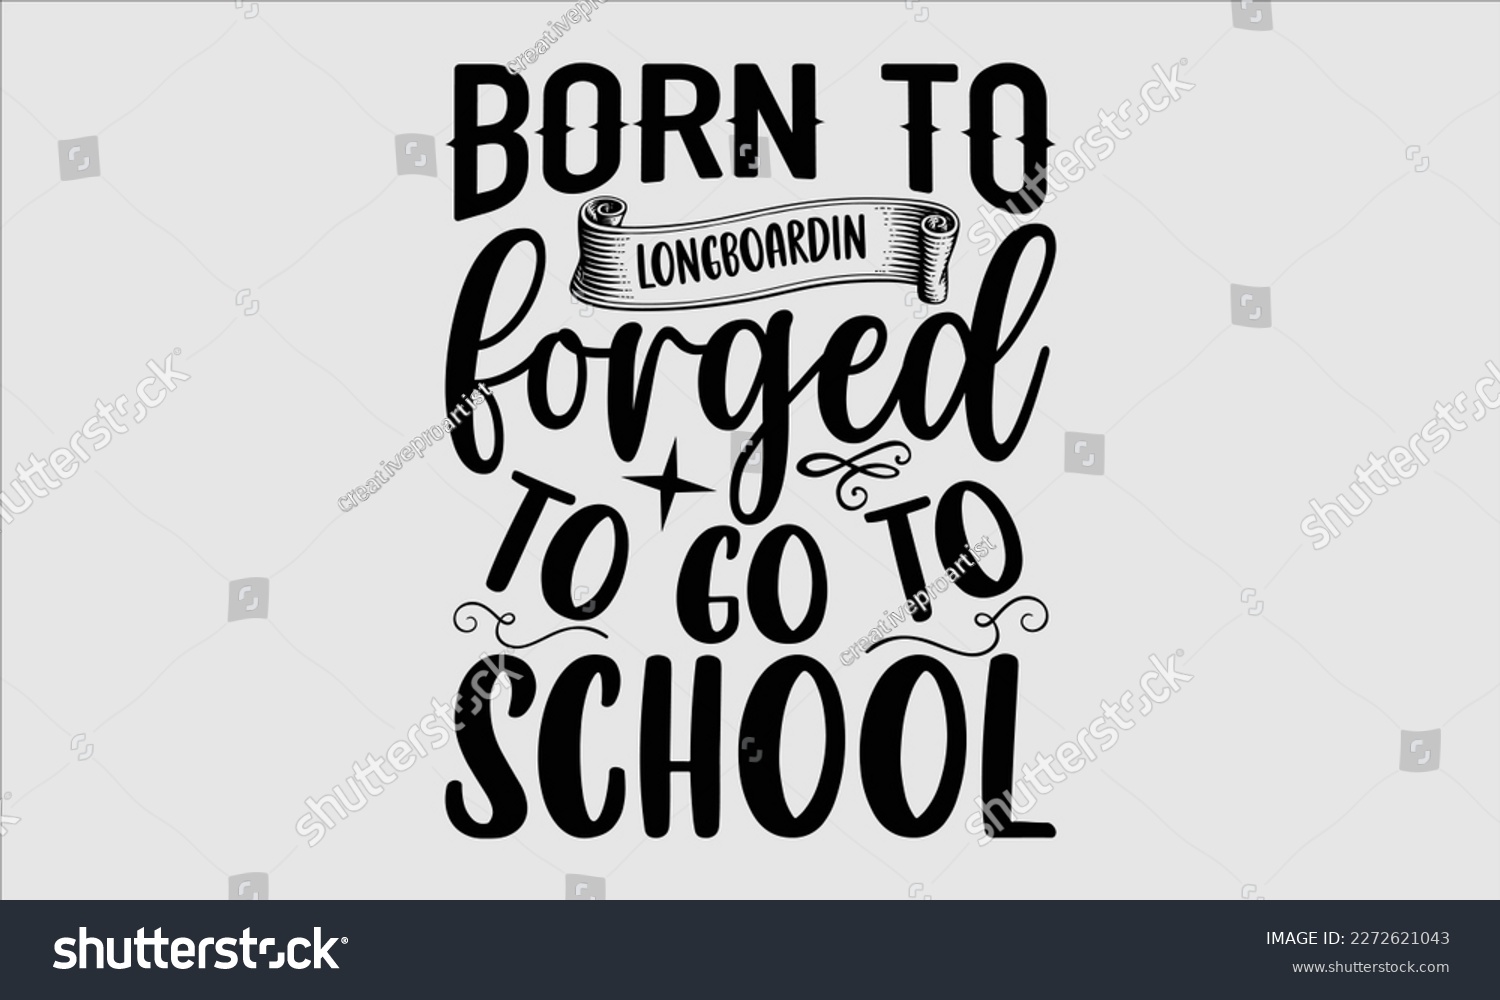 SVG of Born to longboarding forged to go to school- Longboarding T- shirt Design, Hand drawn lettering phrase, Illustration for prints on t-shirts and bags, posters, funny eps files, svg cricut svg